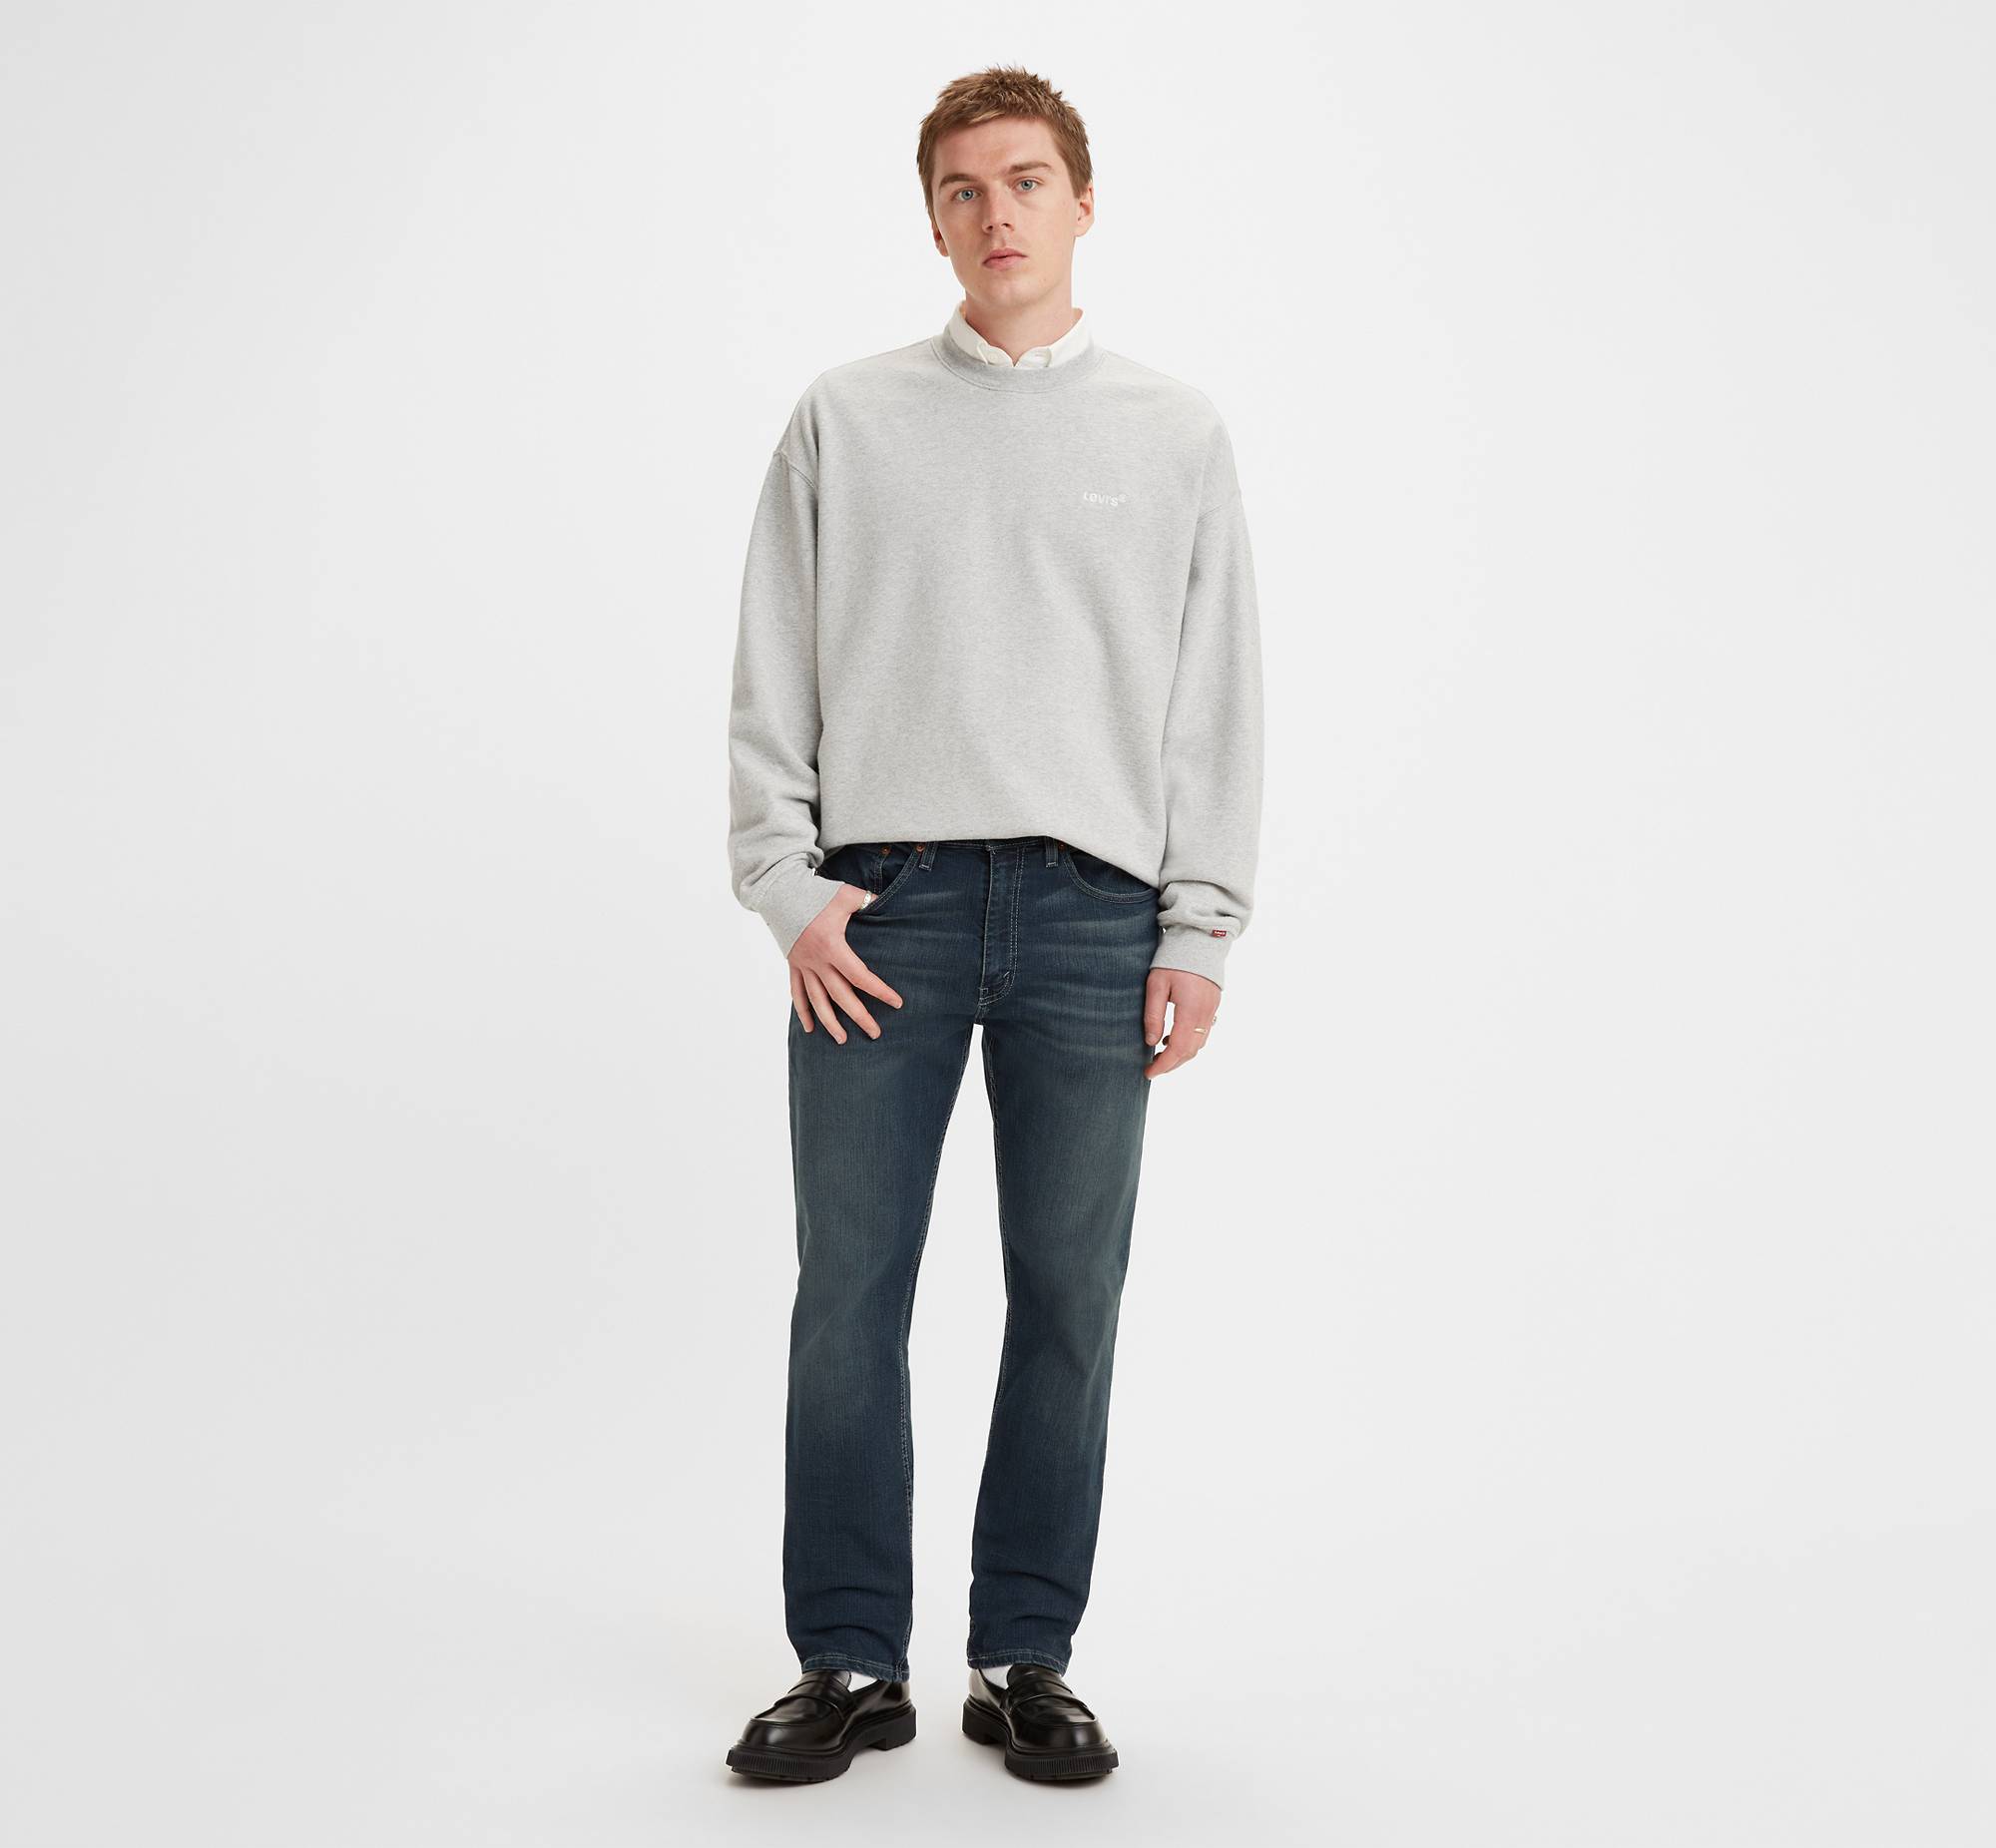 559™ Relaxed Straight Men's Jeans - Medium Wash | Levi's® US